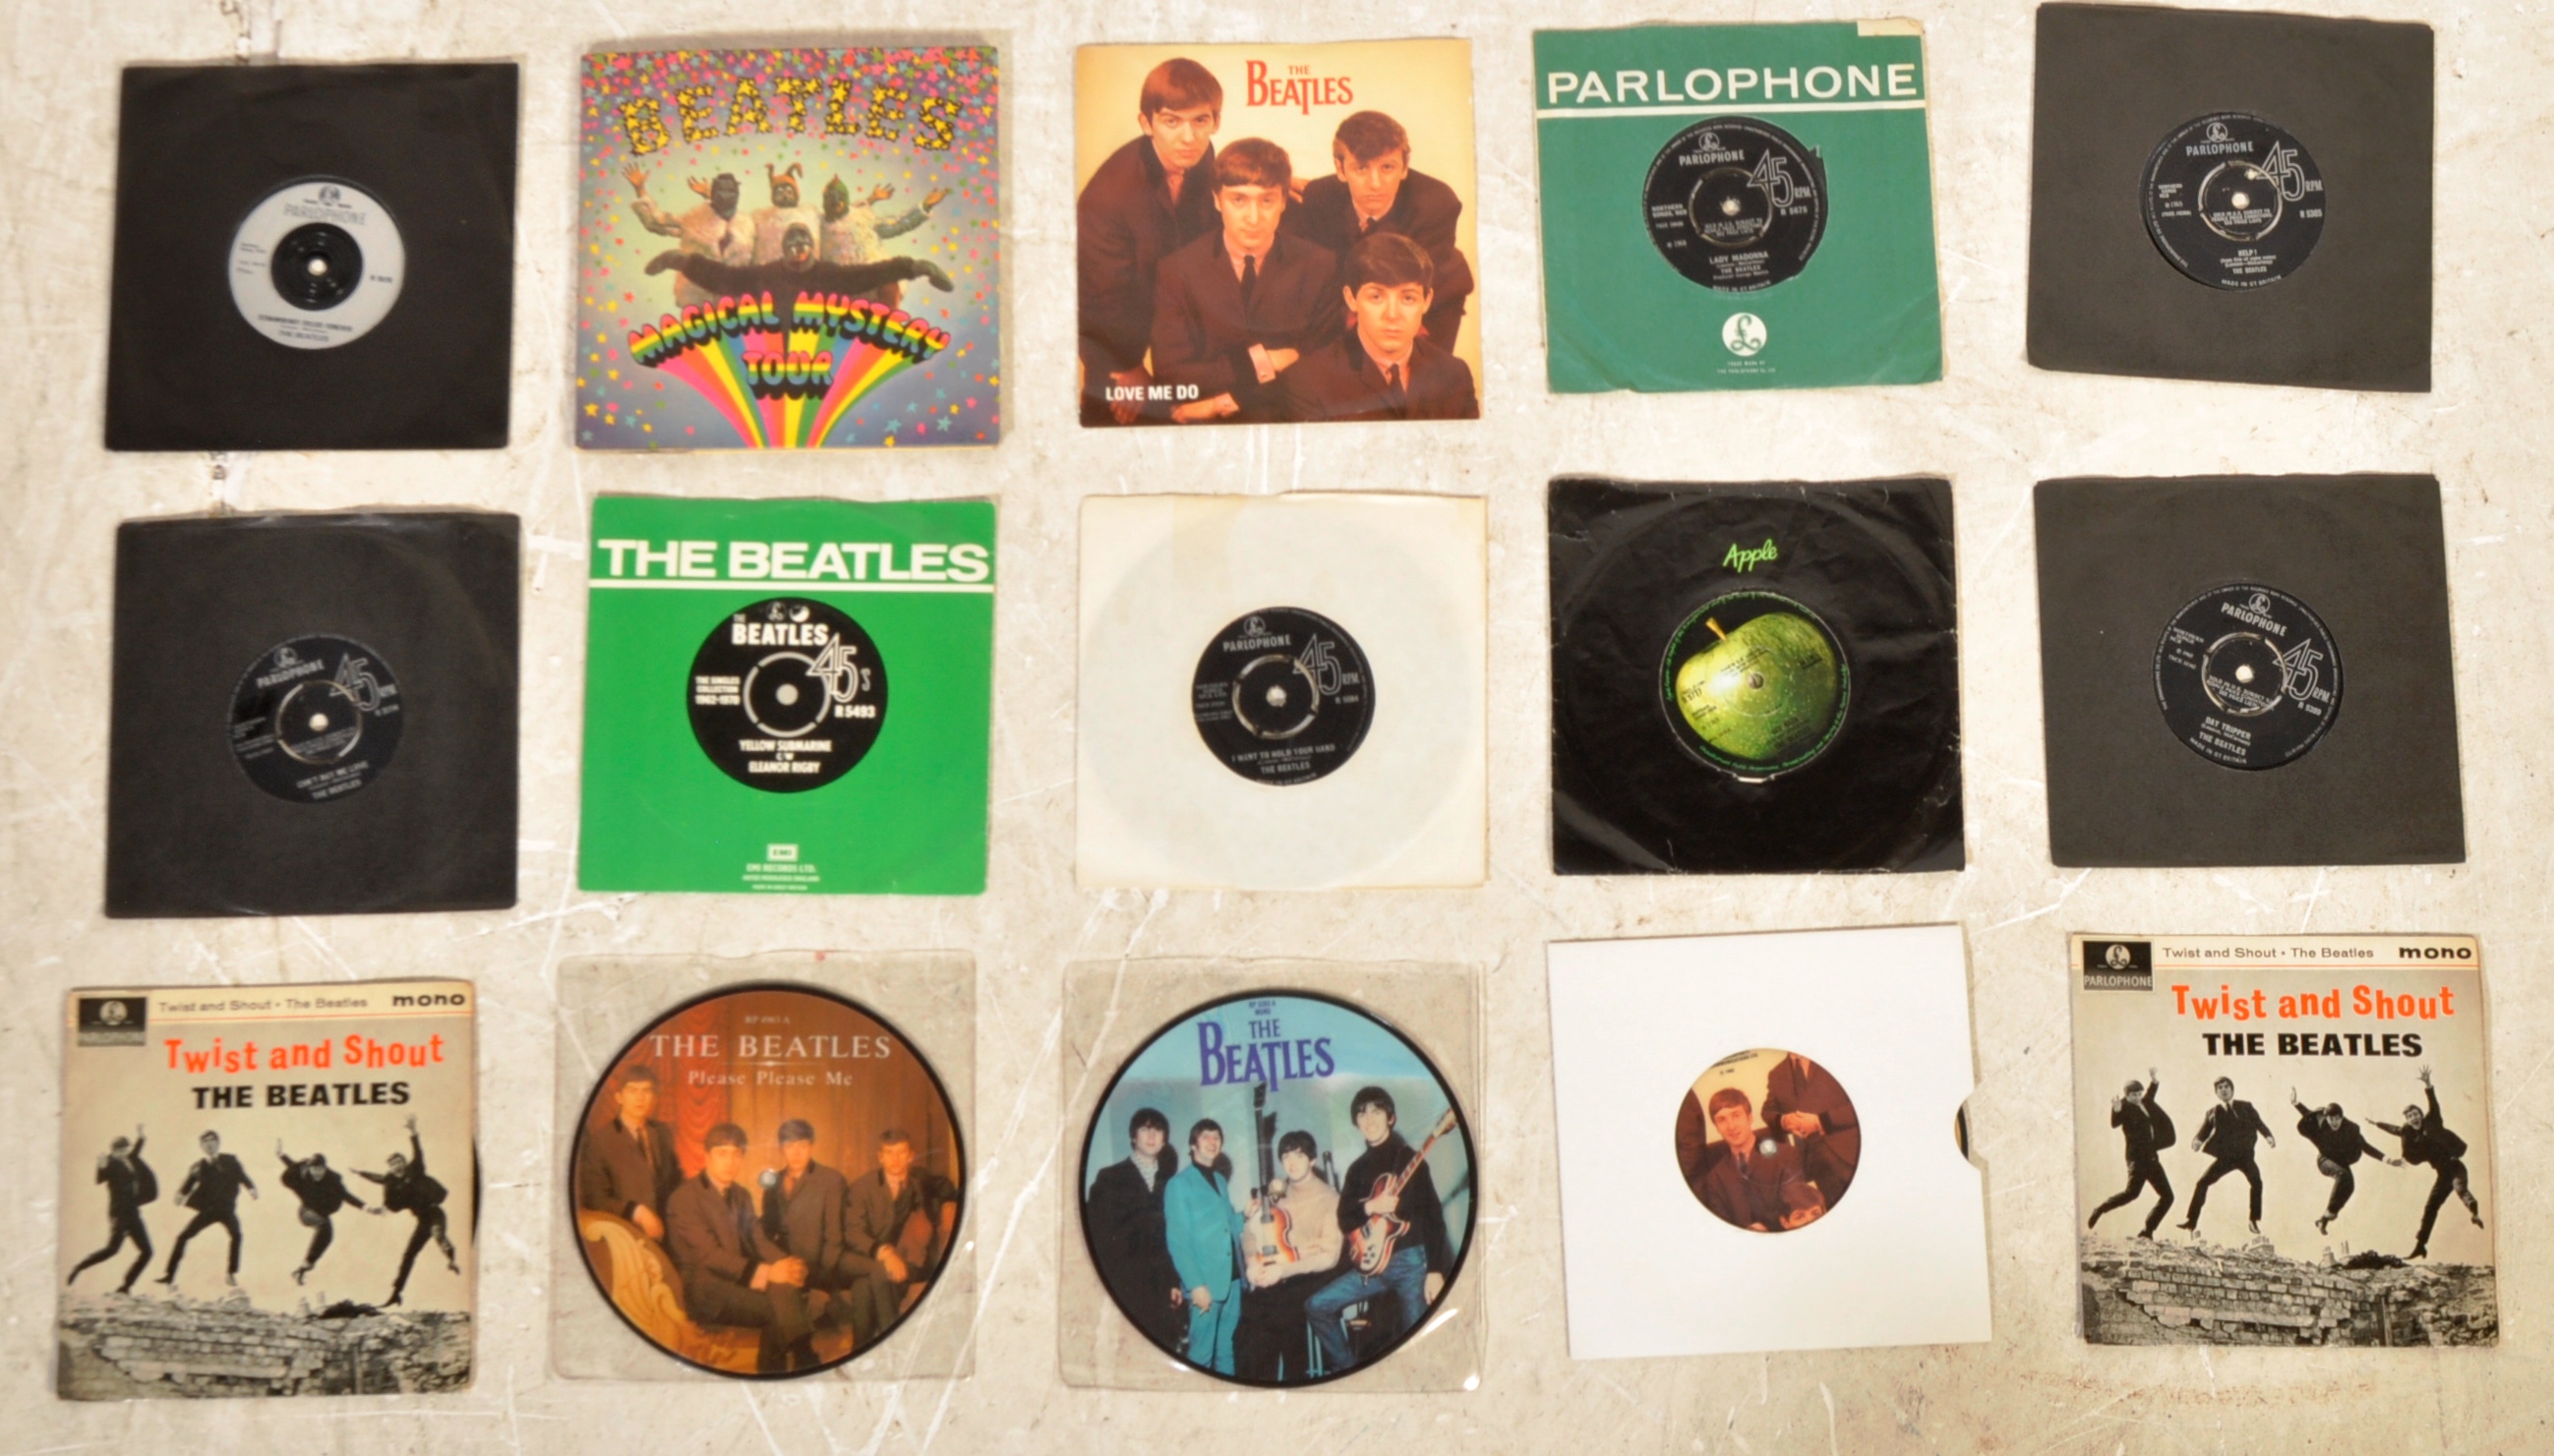 THE BEATLES - SLECTION OF 45RPM 7" VINYL SINGLES